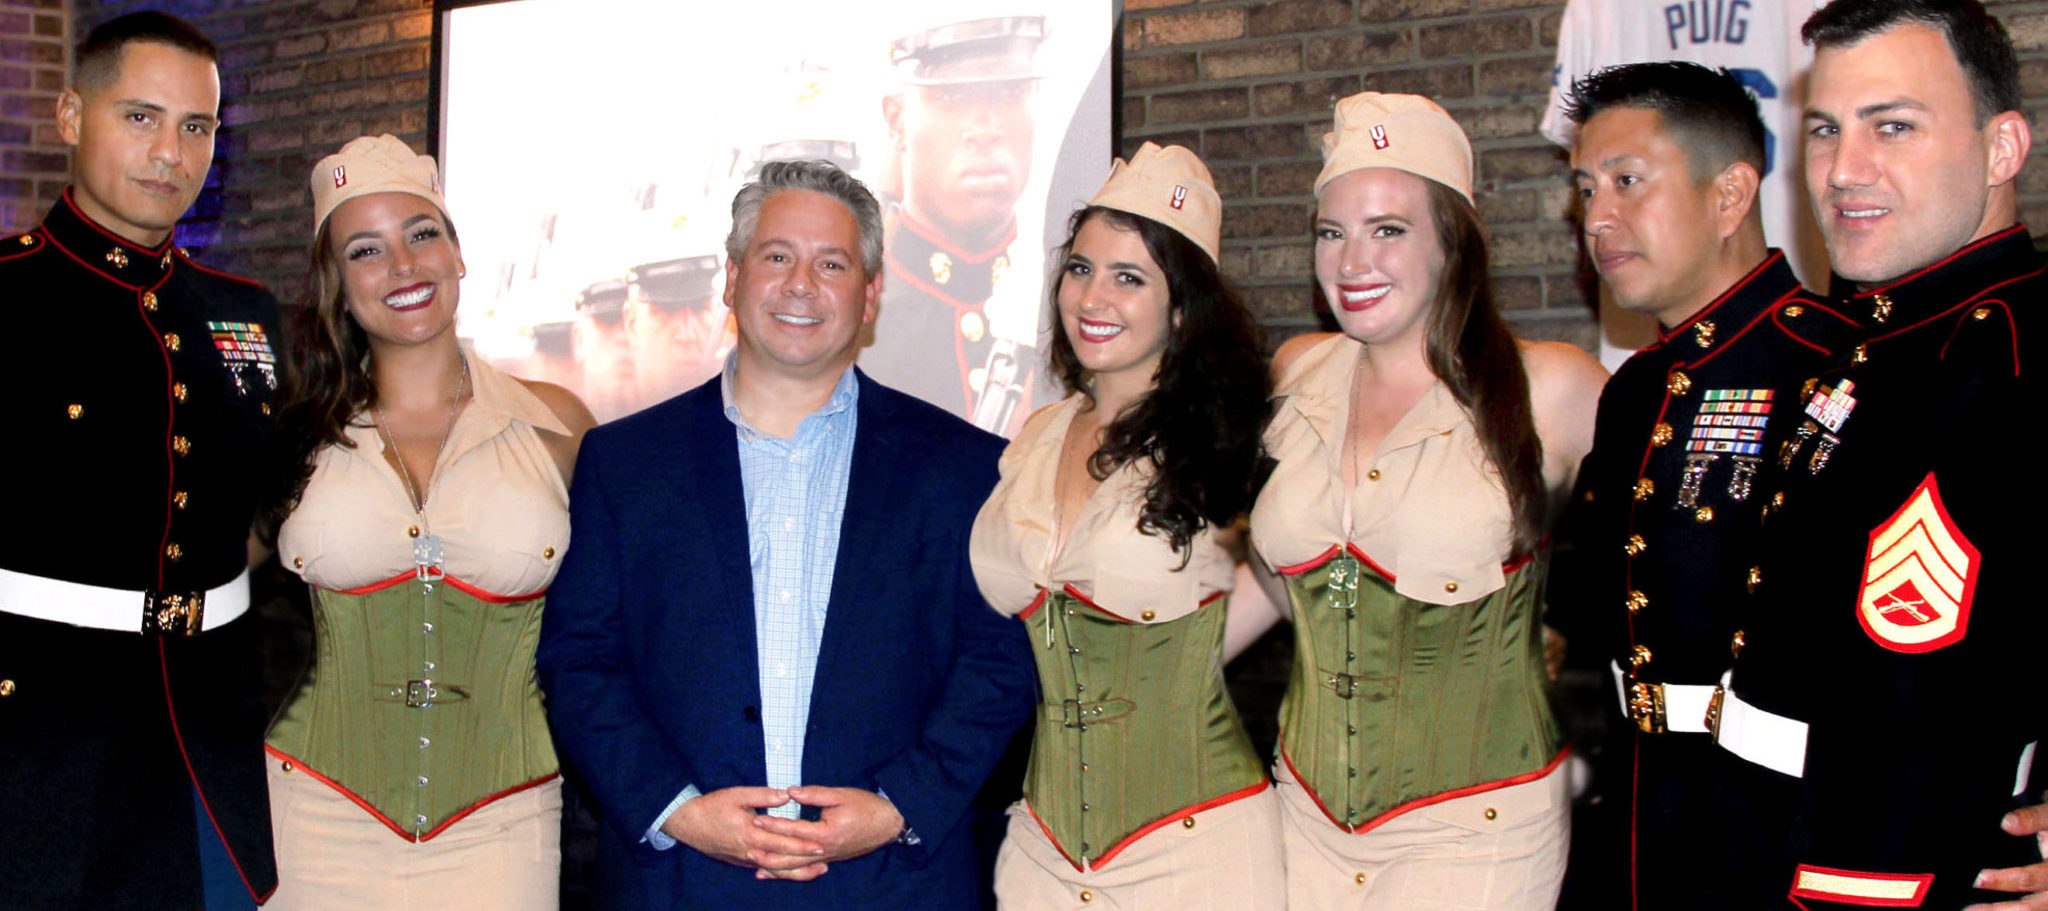 Seen centered is VRL supporter: Jim Nekos, of Edge Technologies, accompanied by the VRL Vixens, and the US Marines.